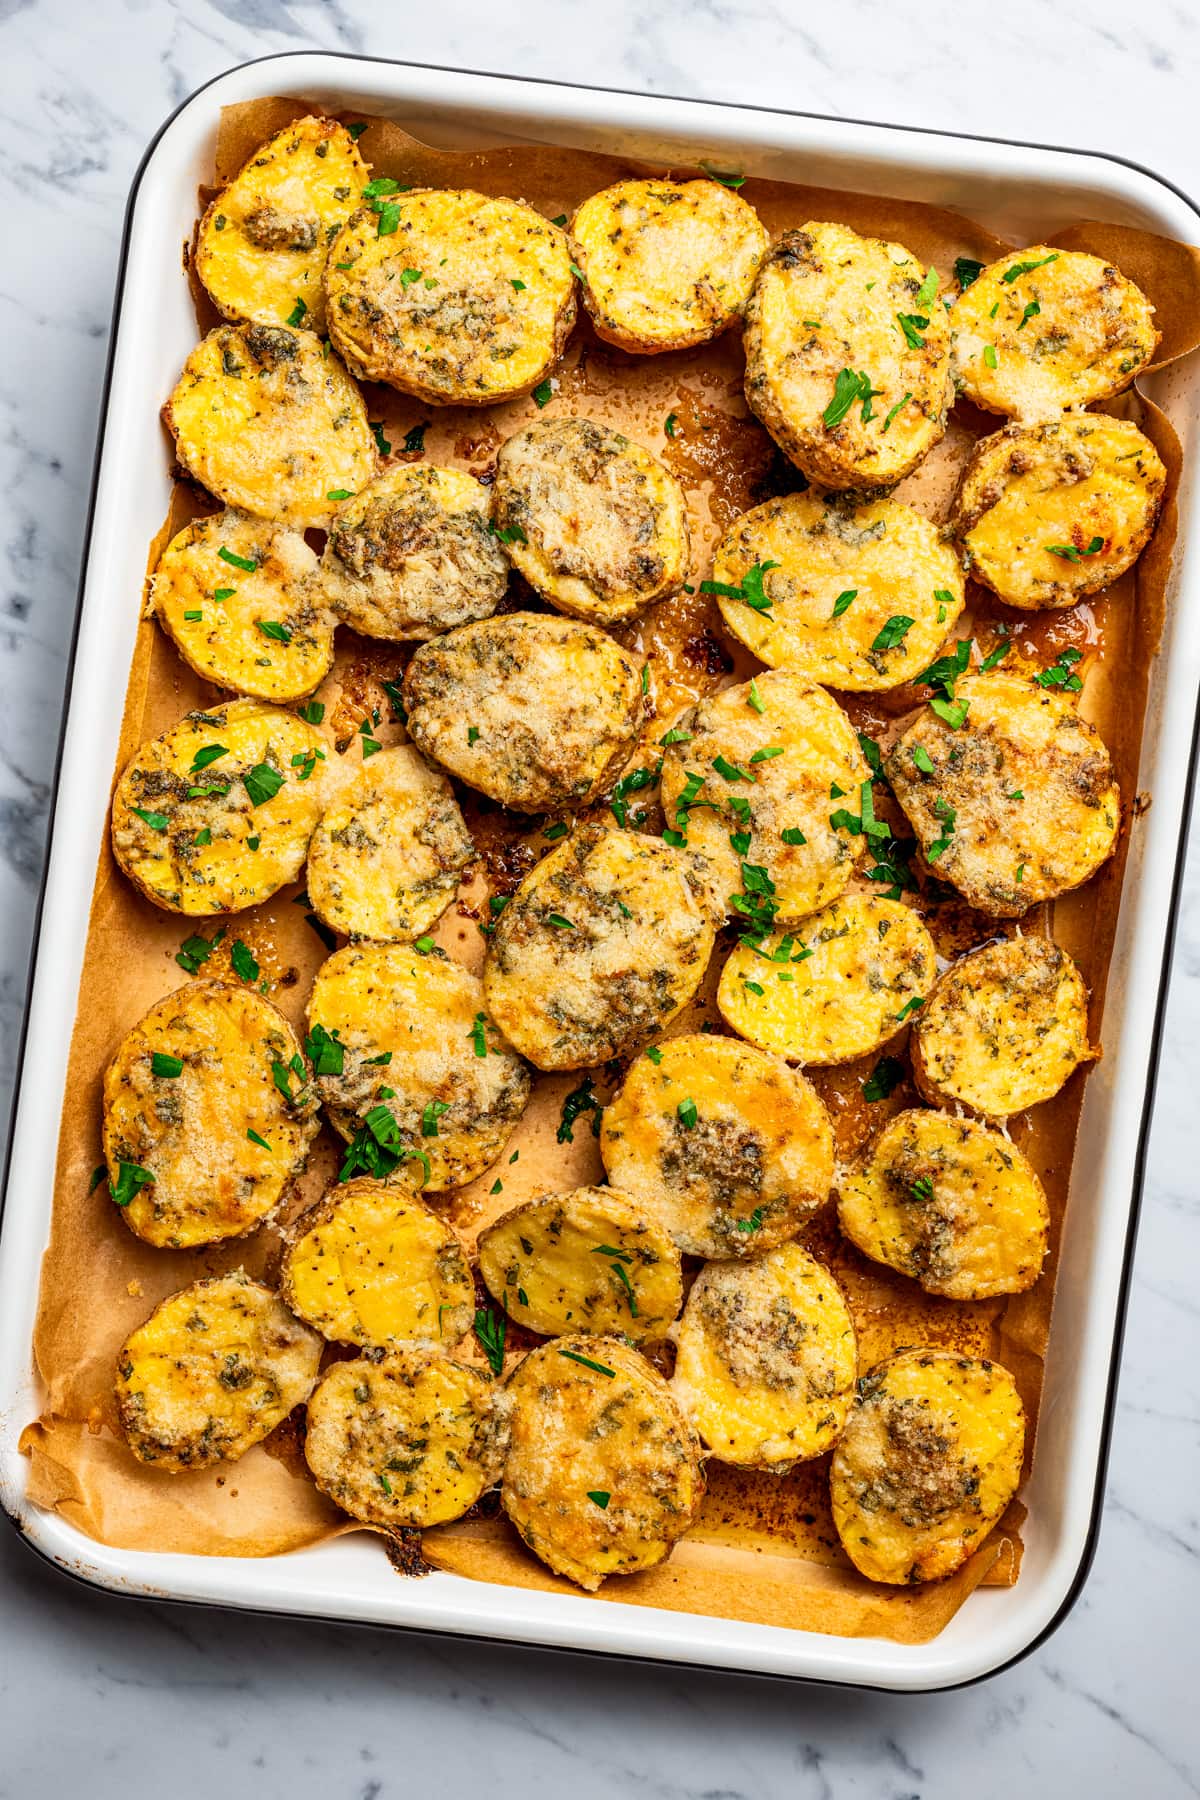 Overhead image of parmesan crusted potatoes arranged on a baking sheet.